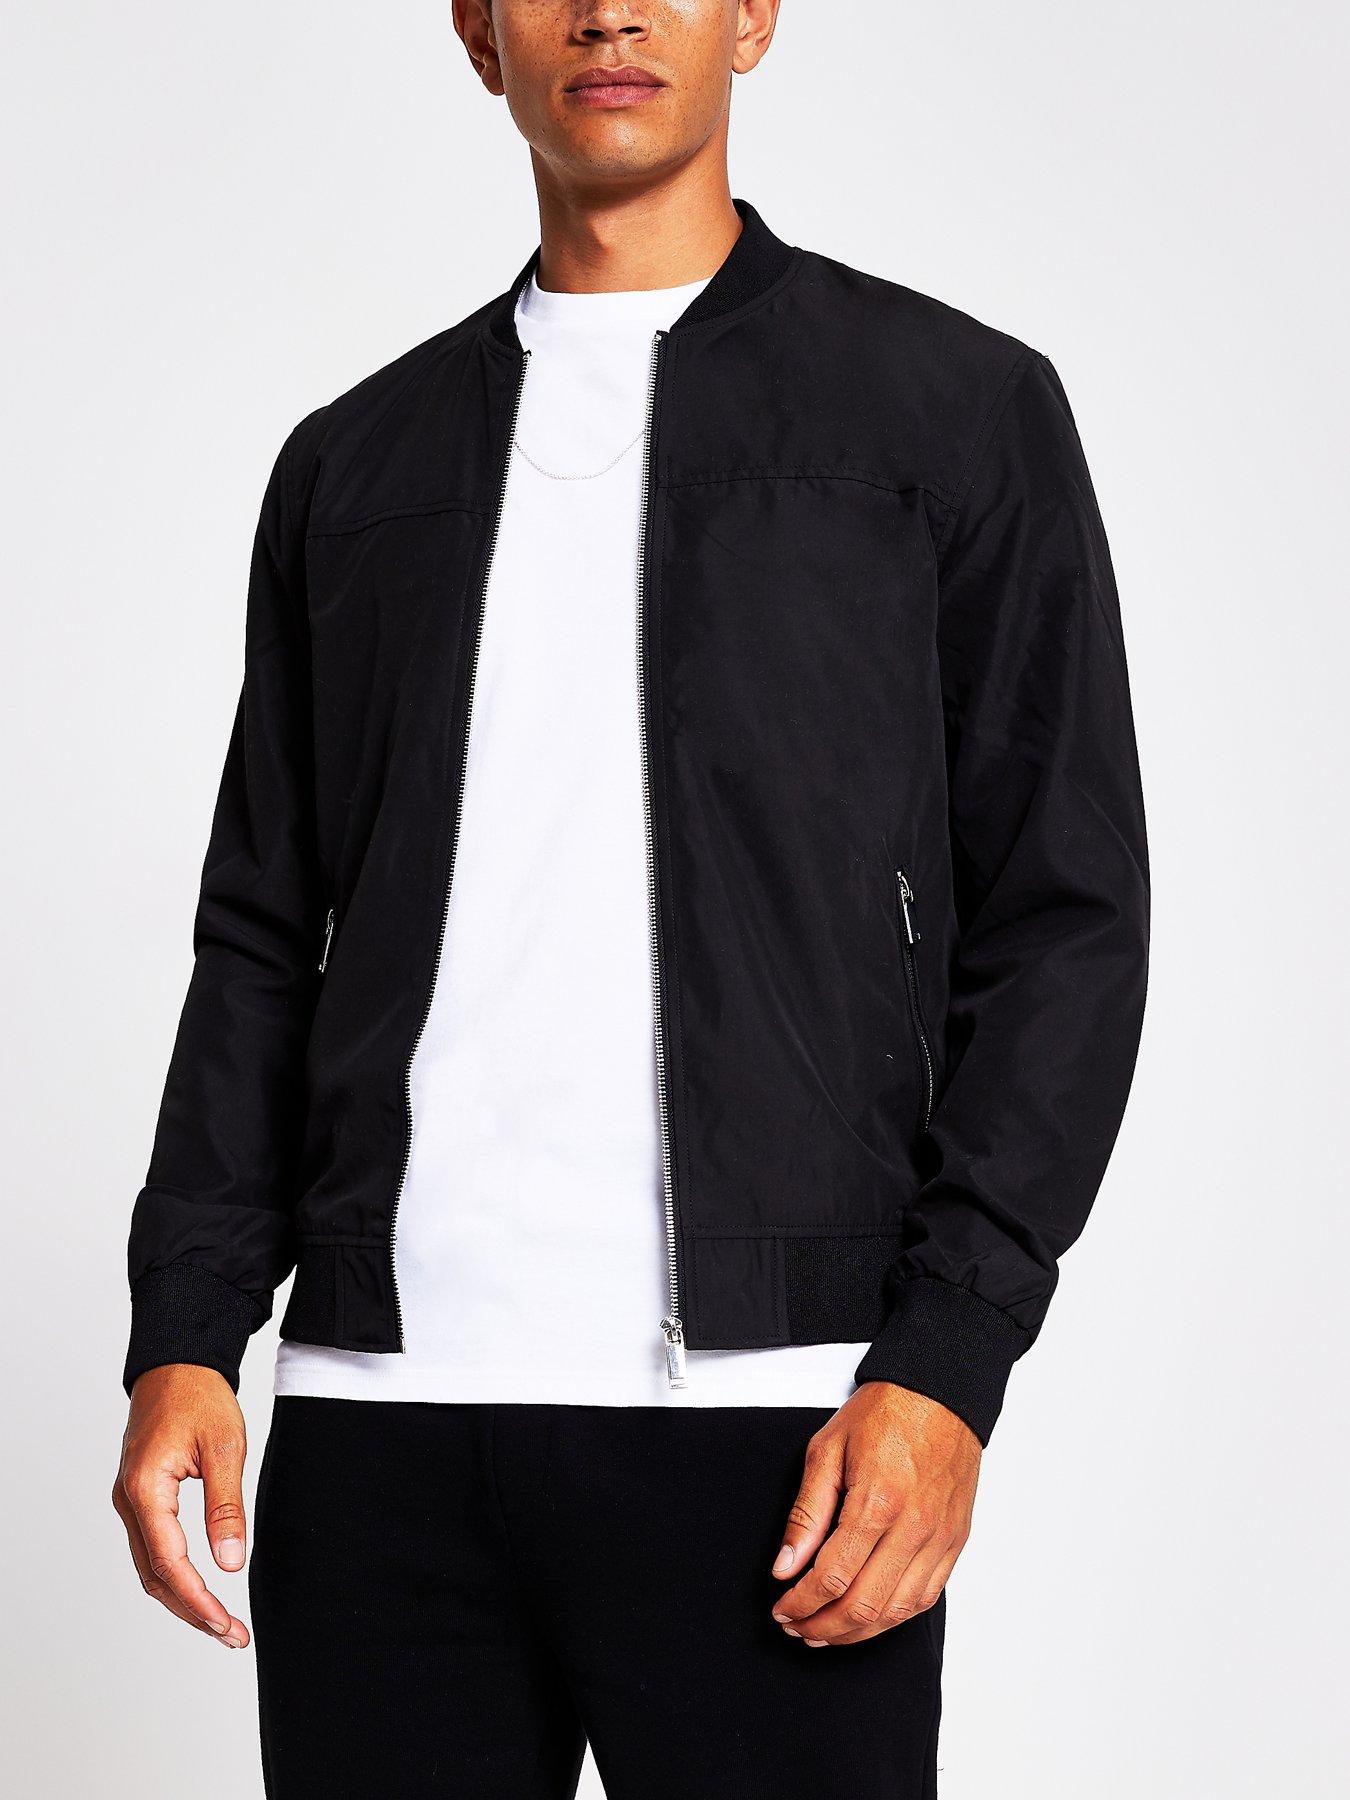 river island mens jackets saleUltimate Special Offers – 2021 New